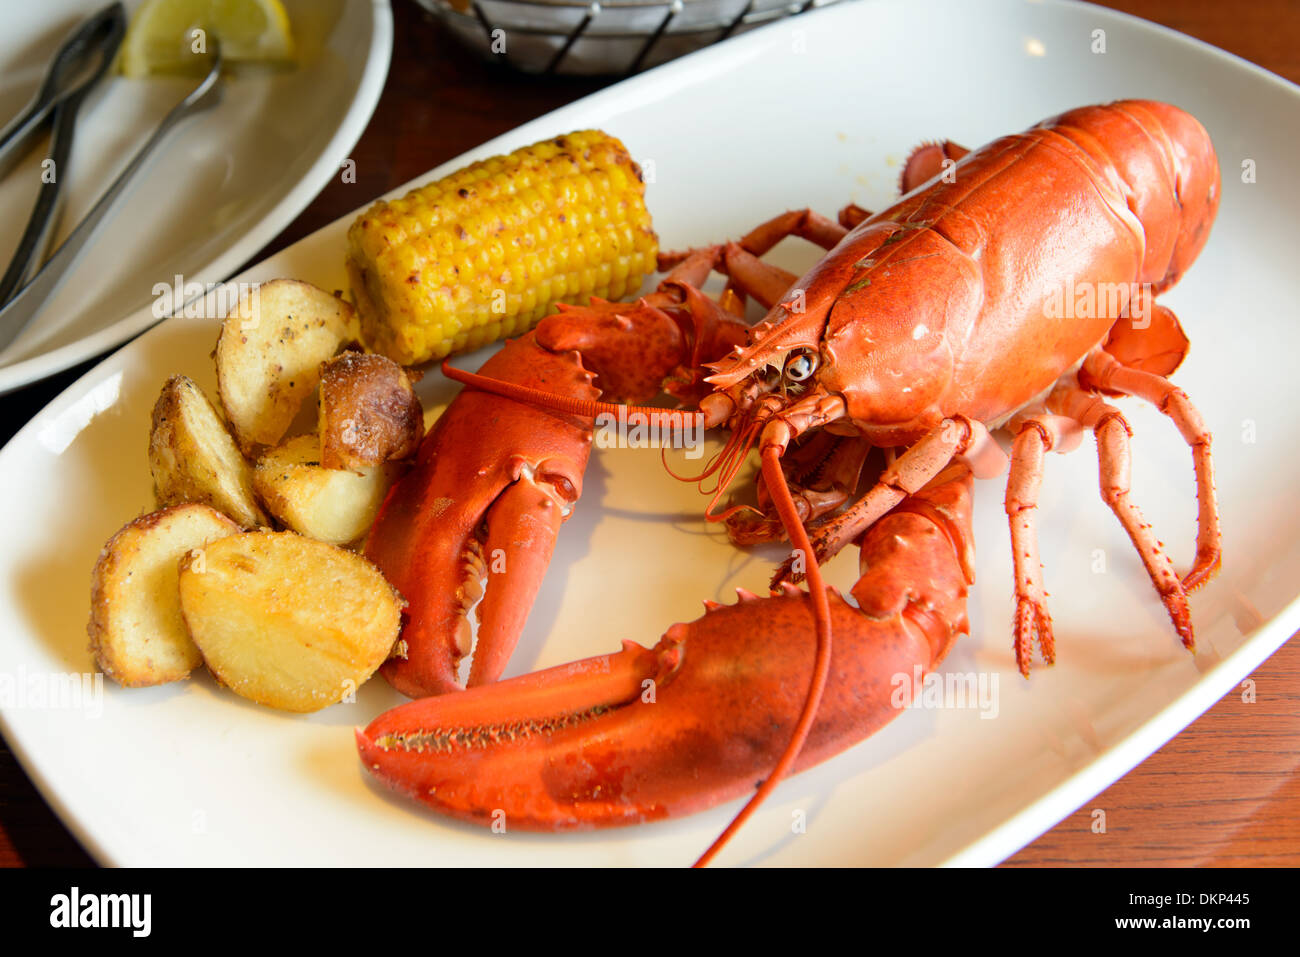 Roasted live marine red lobster served on plate Stock Photo